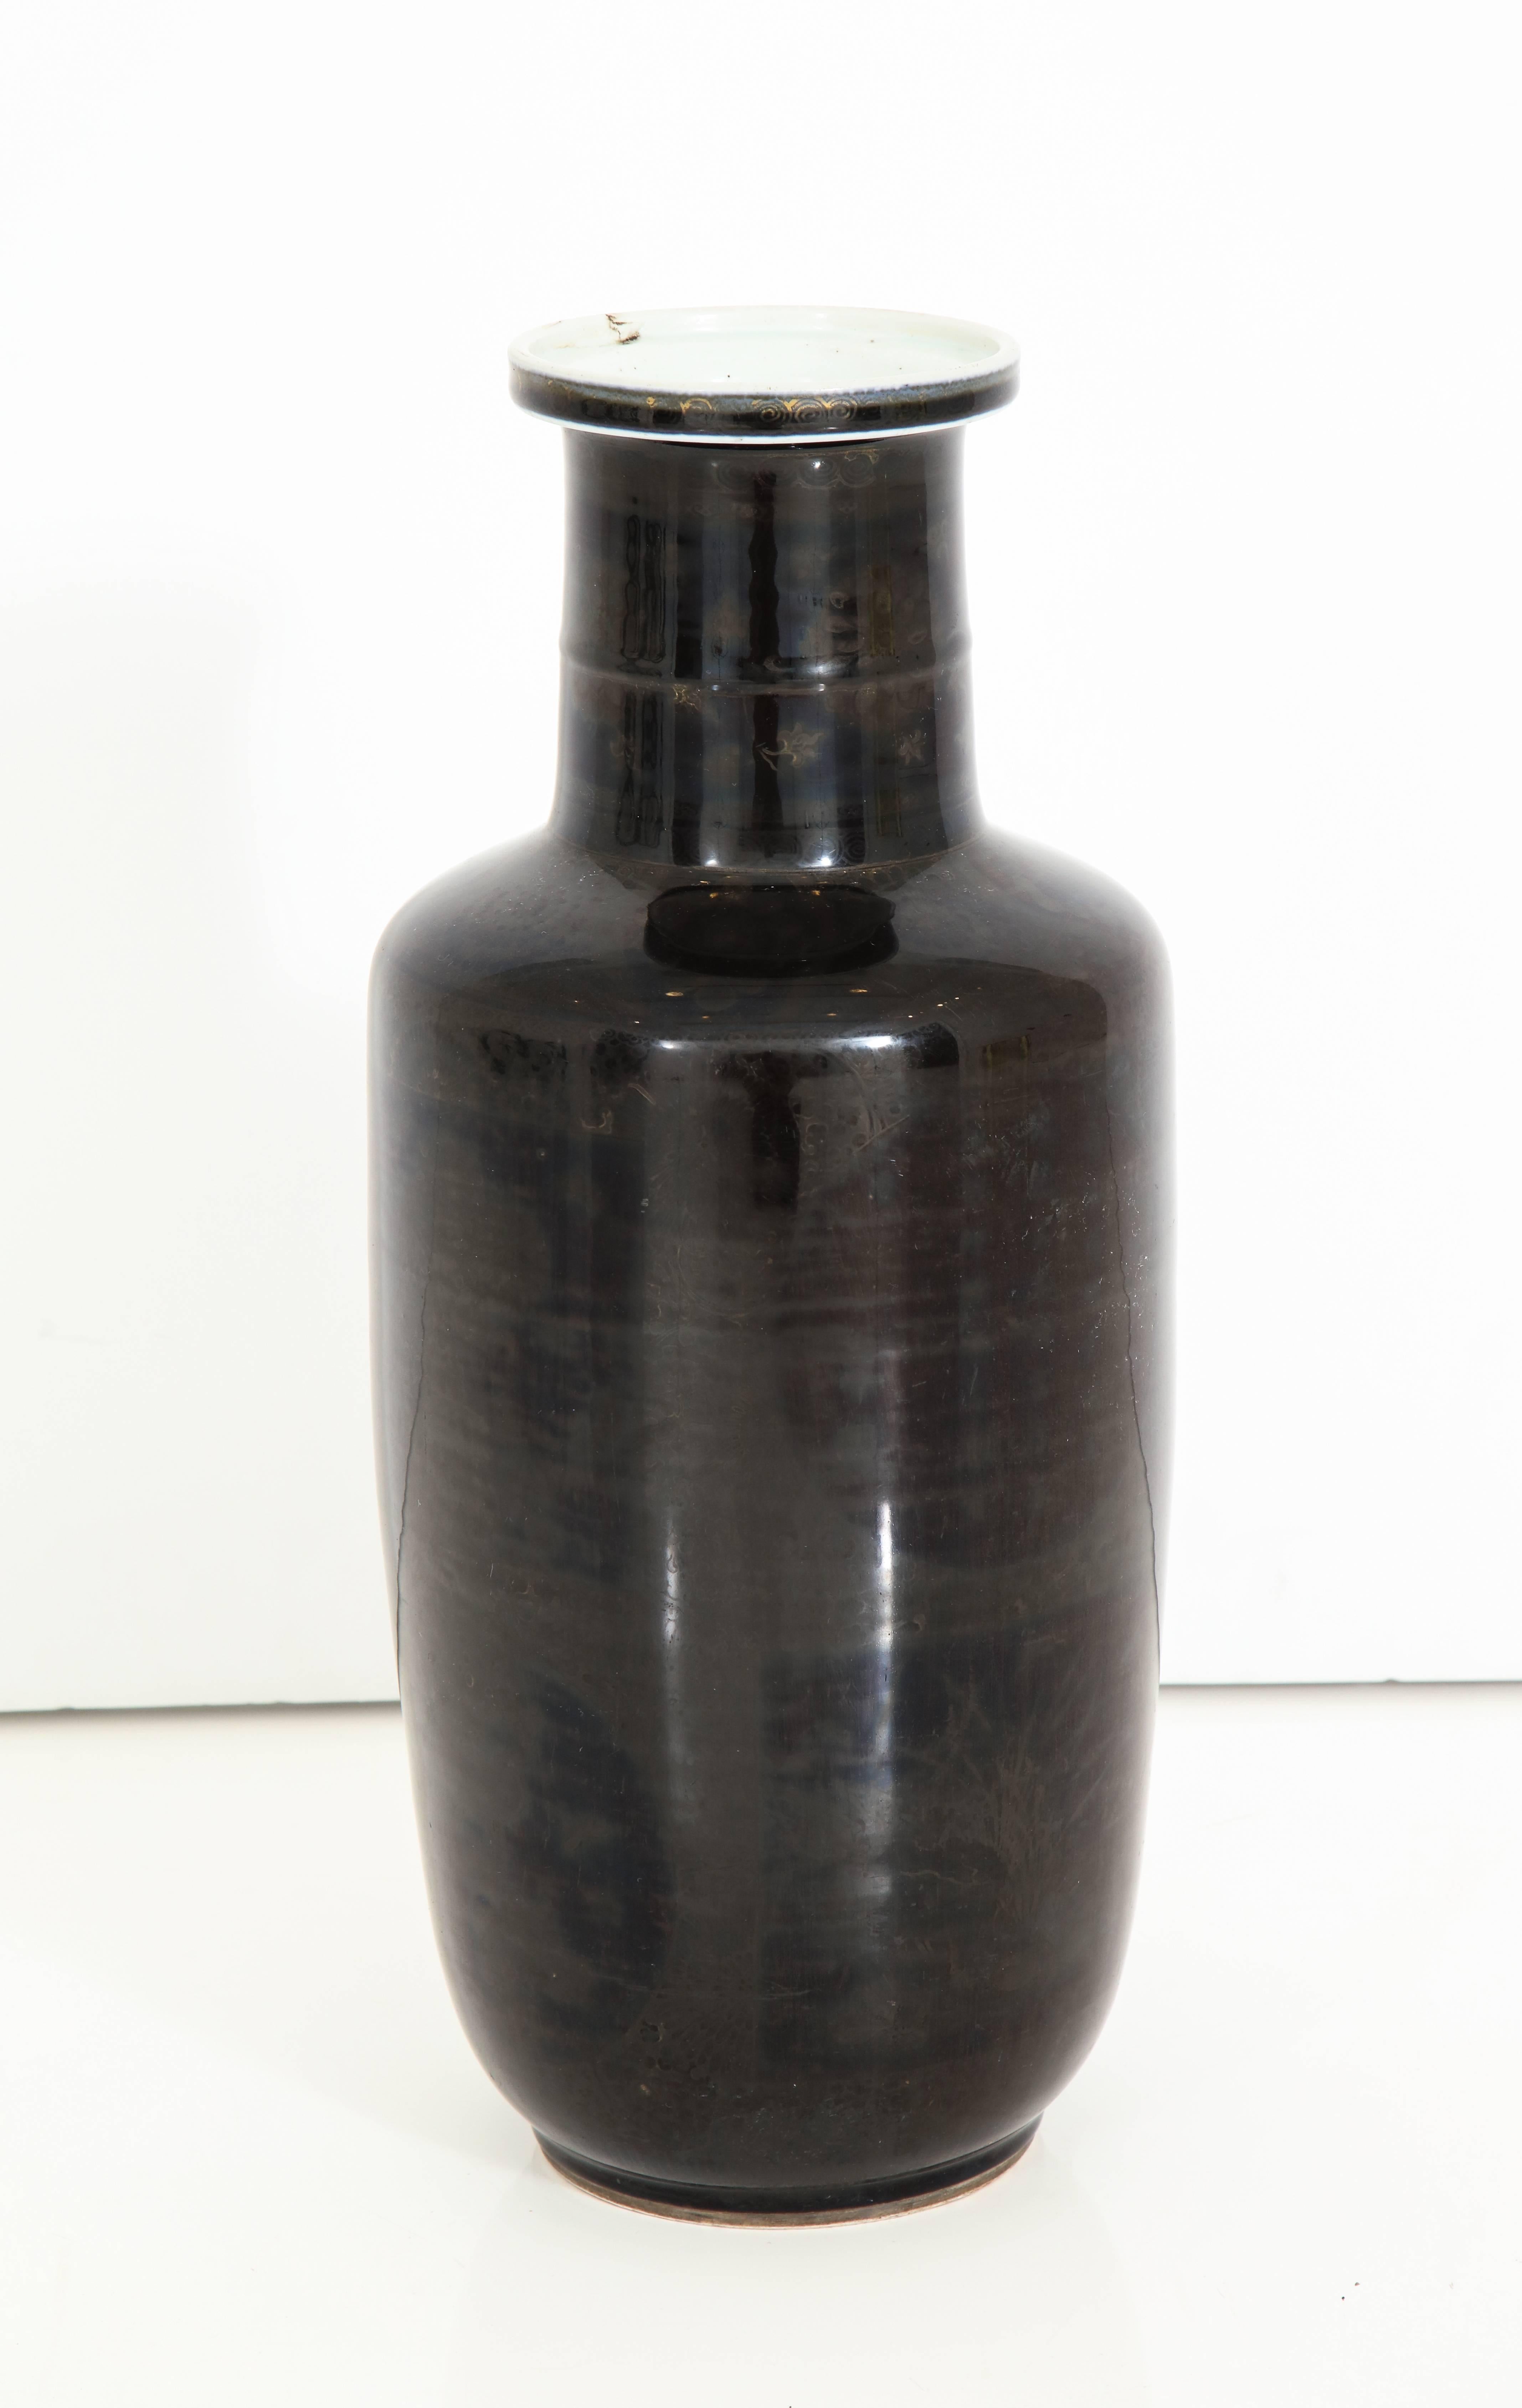 A Chinese Kangxi period black vase with traces of original floral decoration in gilt.
China, Kangxi period, circa 1720
Size: 18